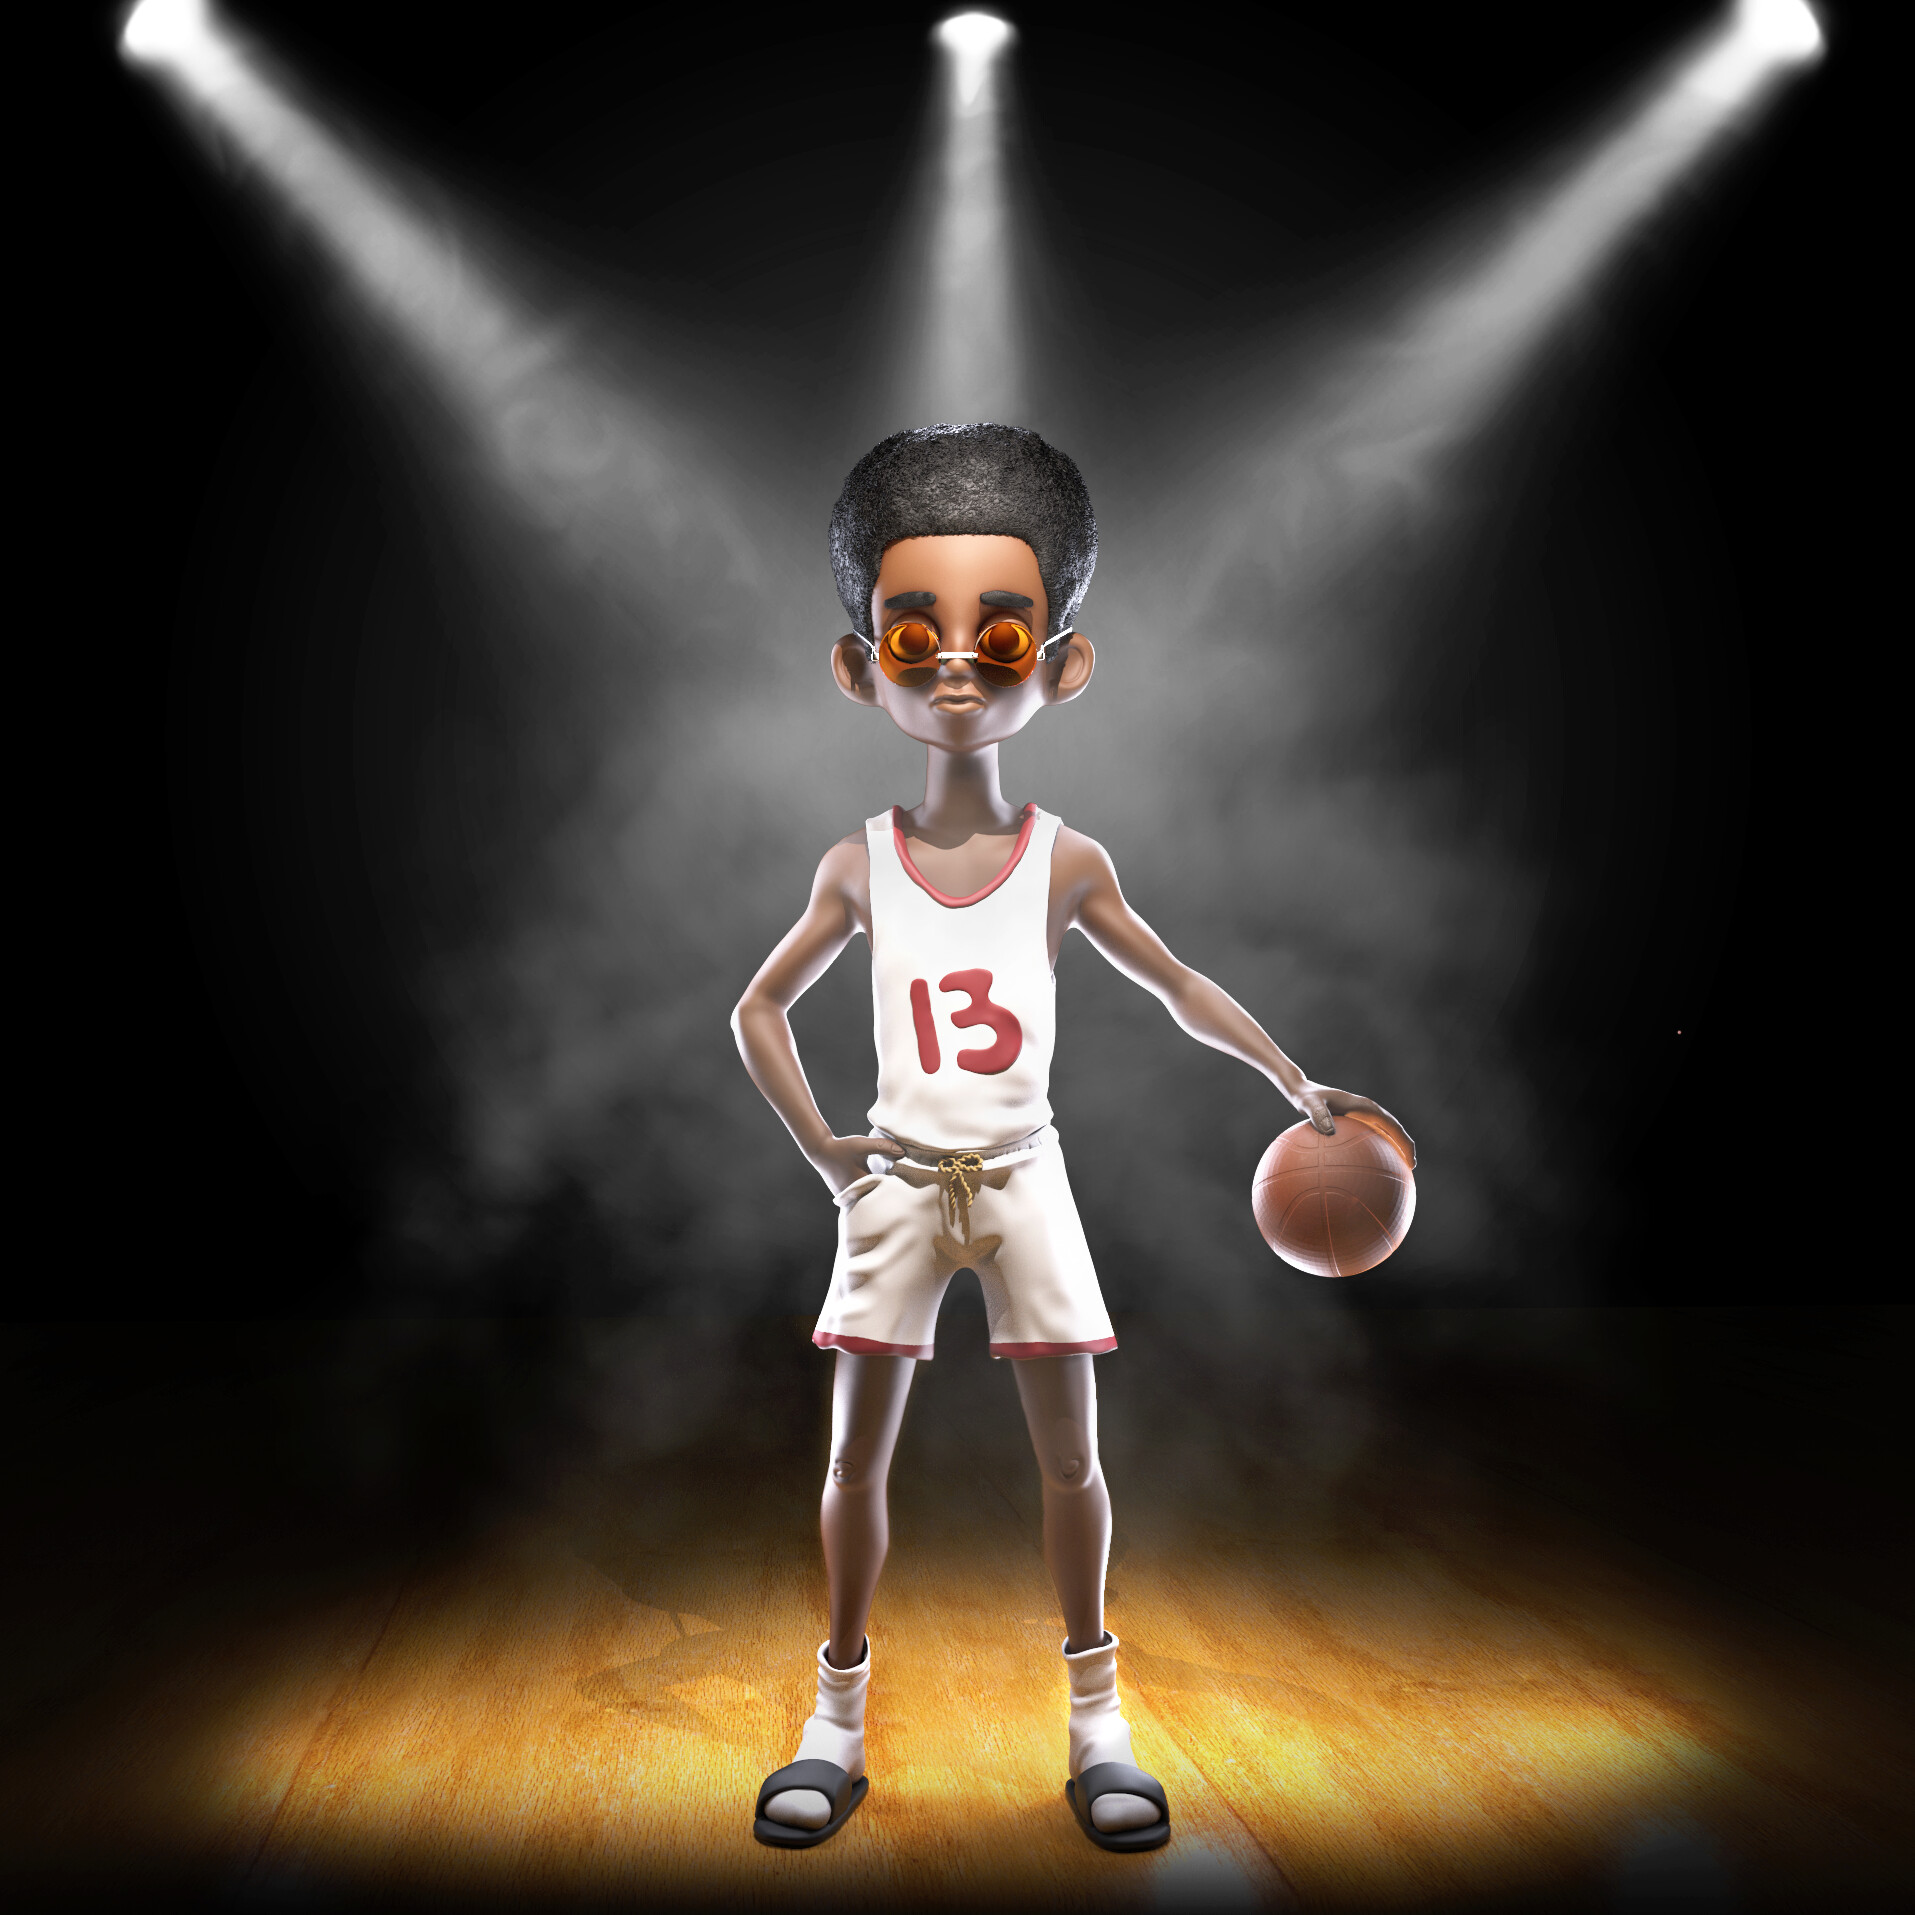 ArtStation - Illustrations of basketball players I had to to for someone